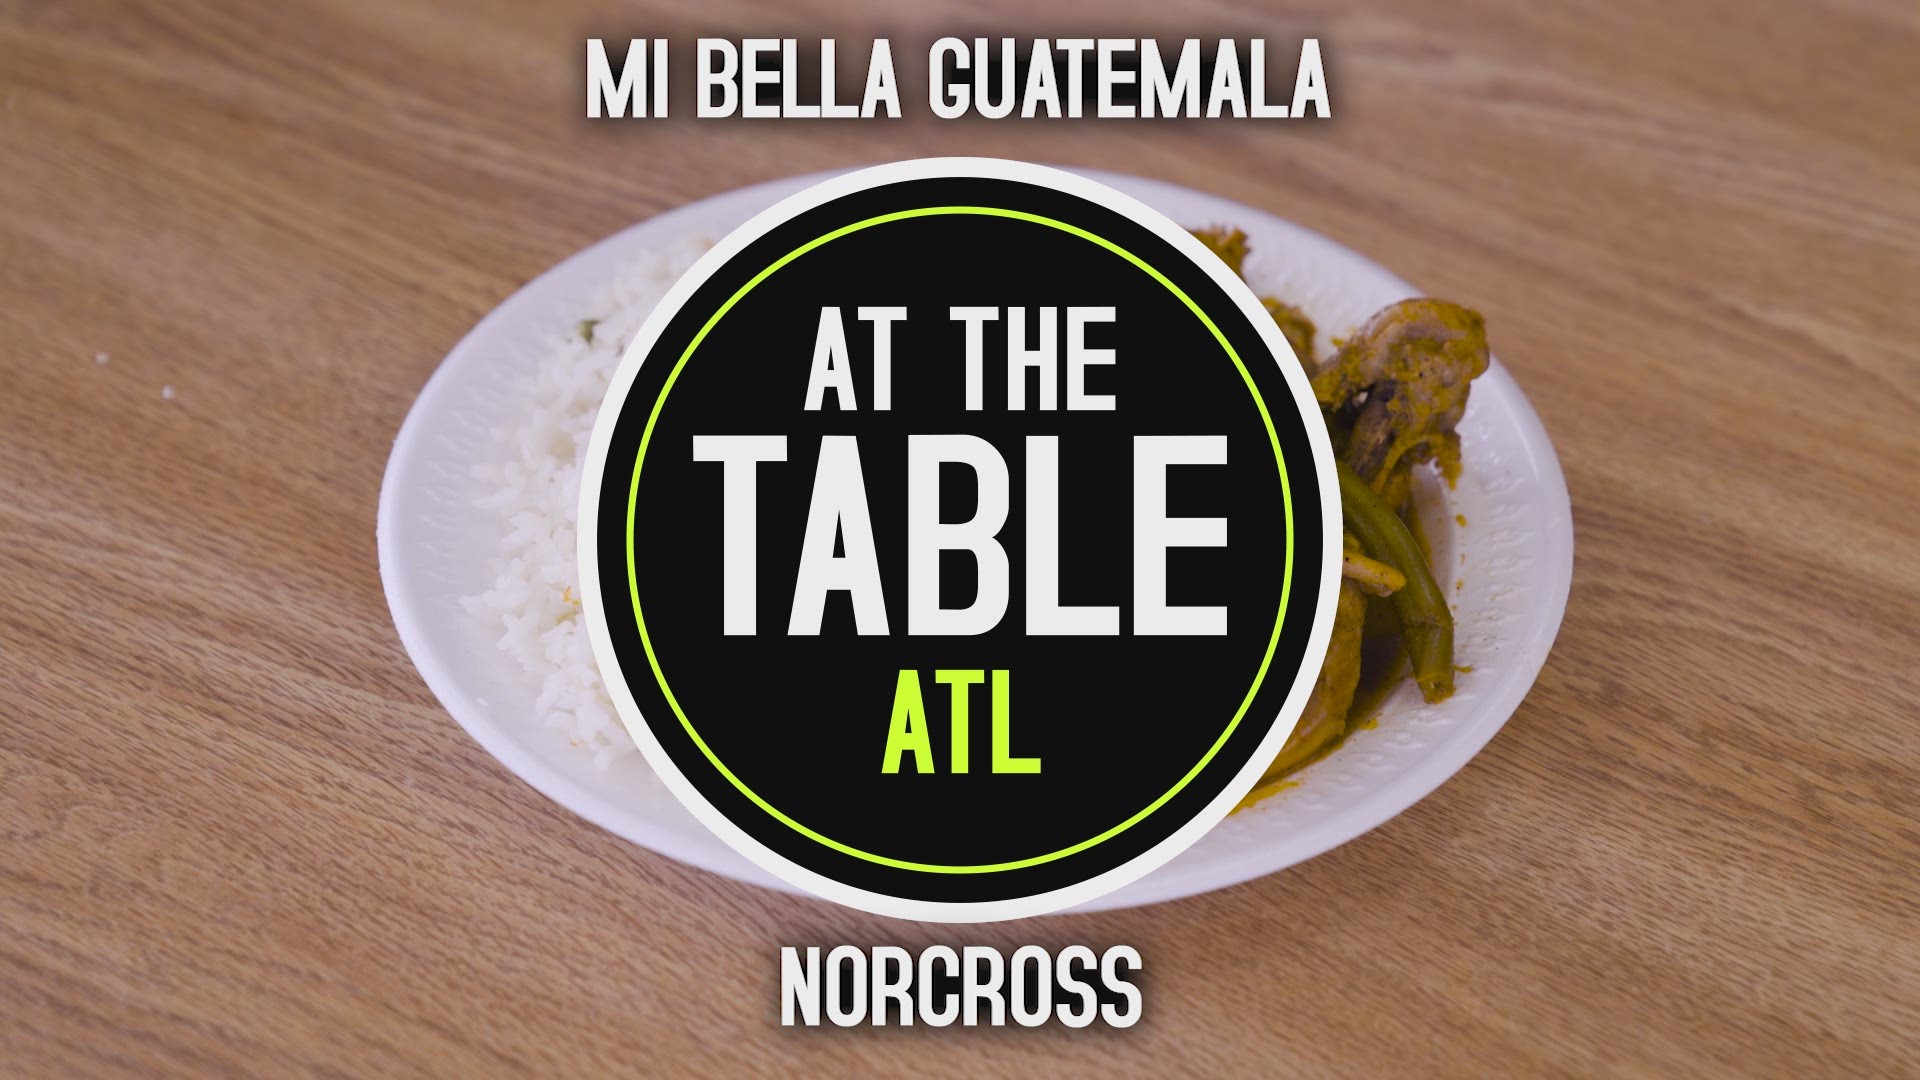 Mi Bella Guatemala restaurant and bakery is committed to sharing a Guatemalan fare with metro diners